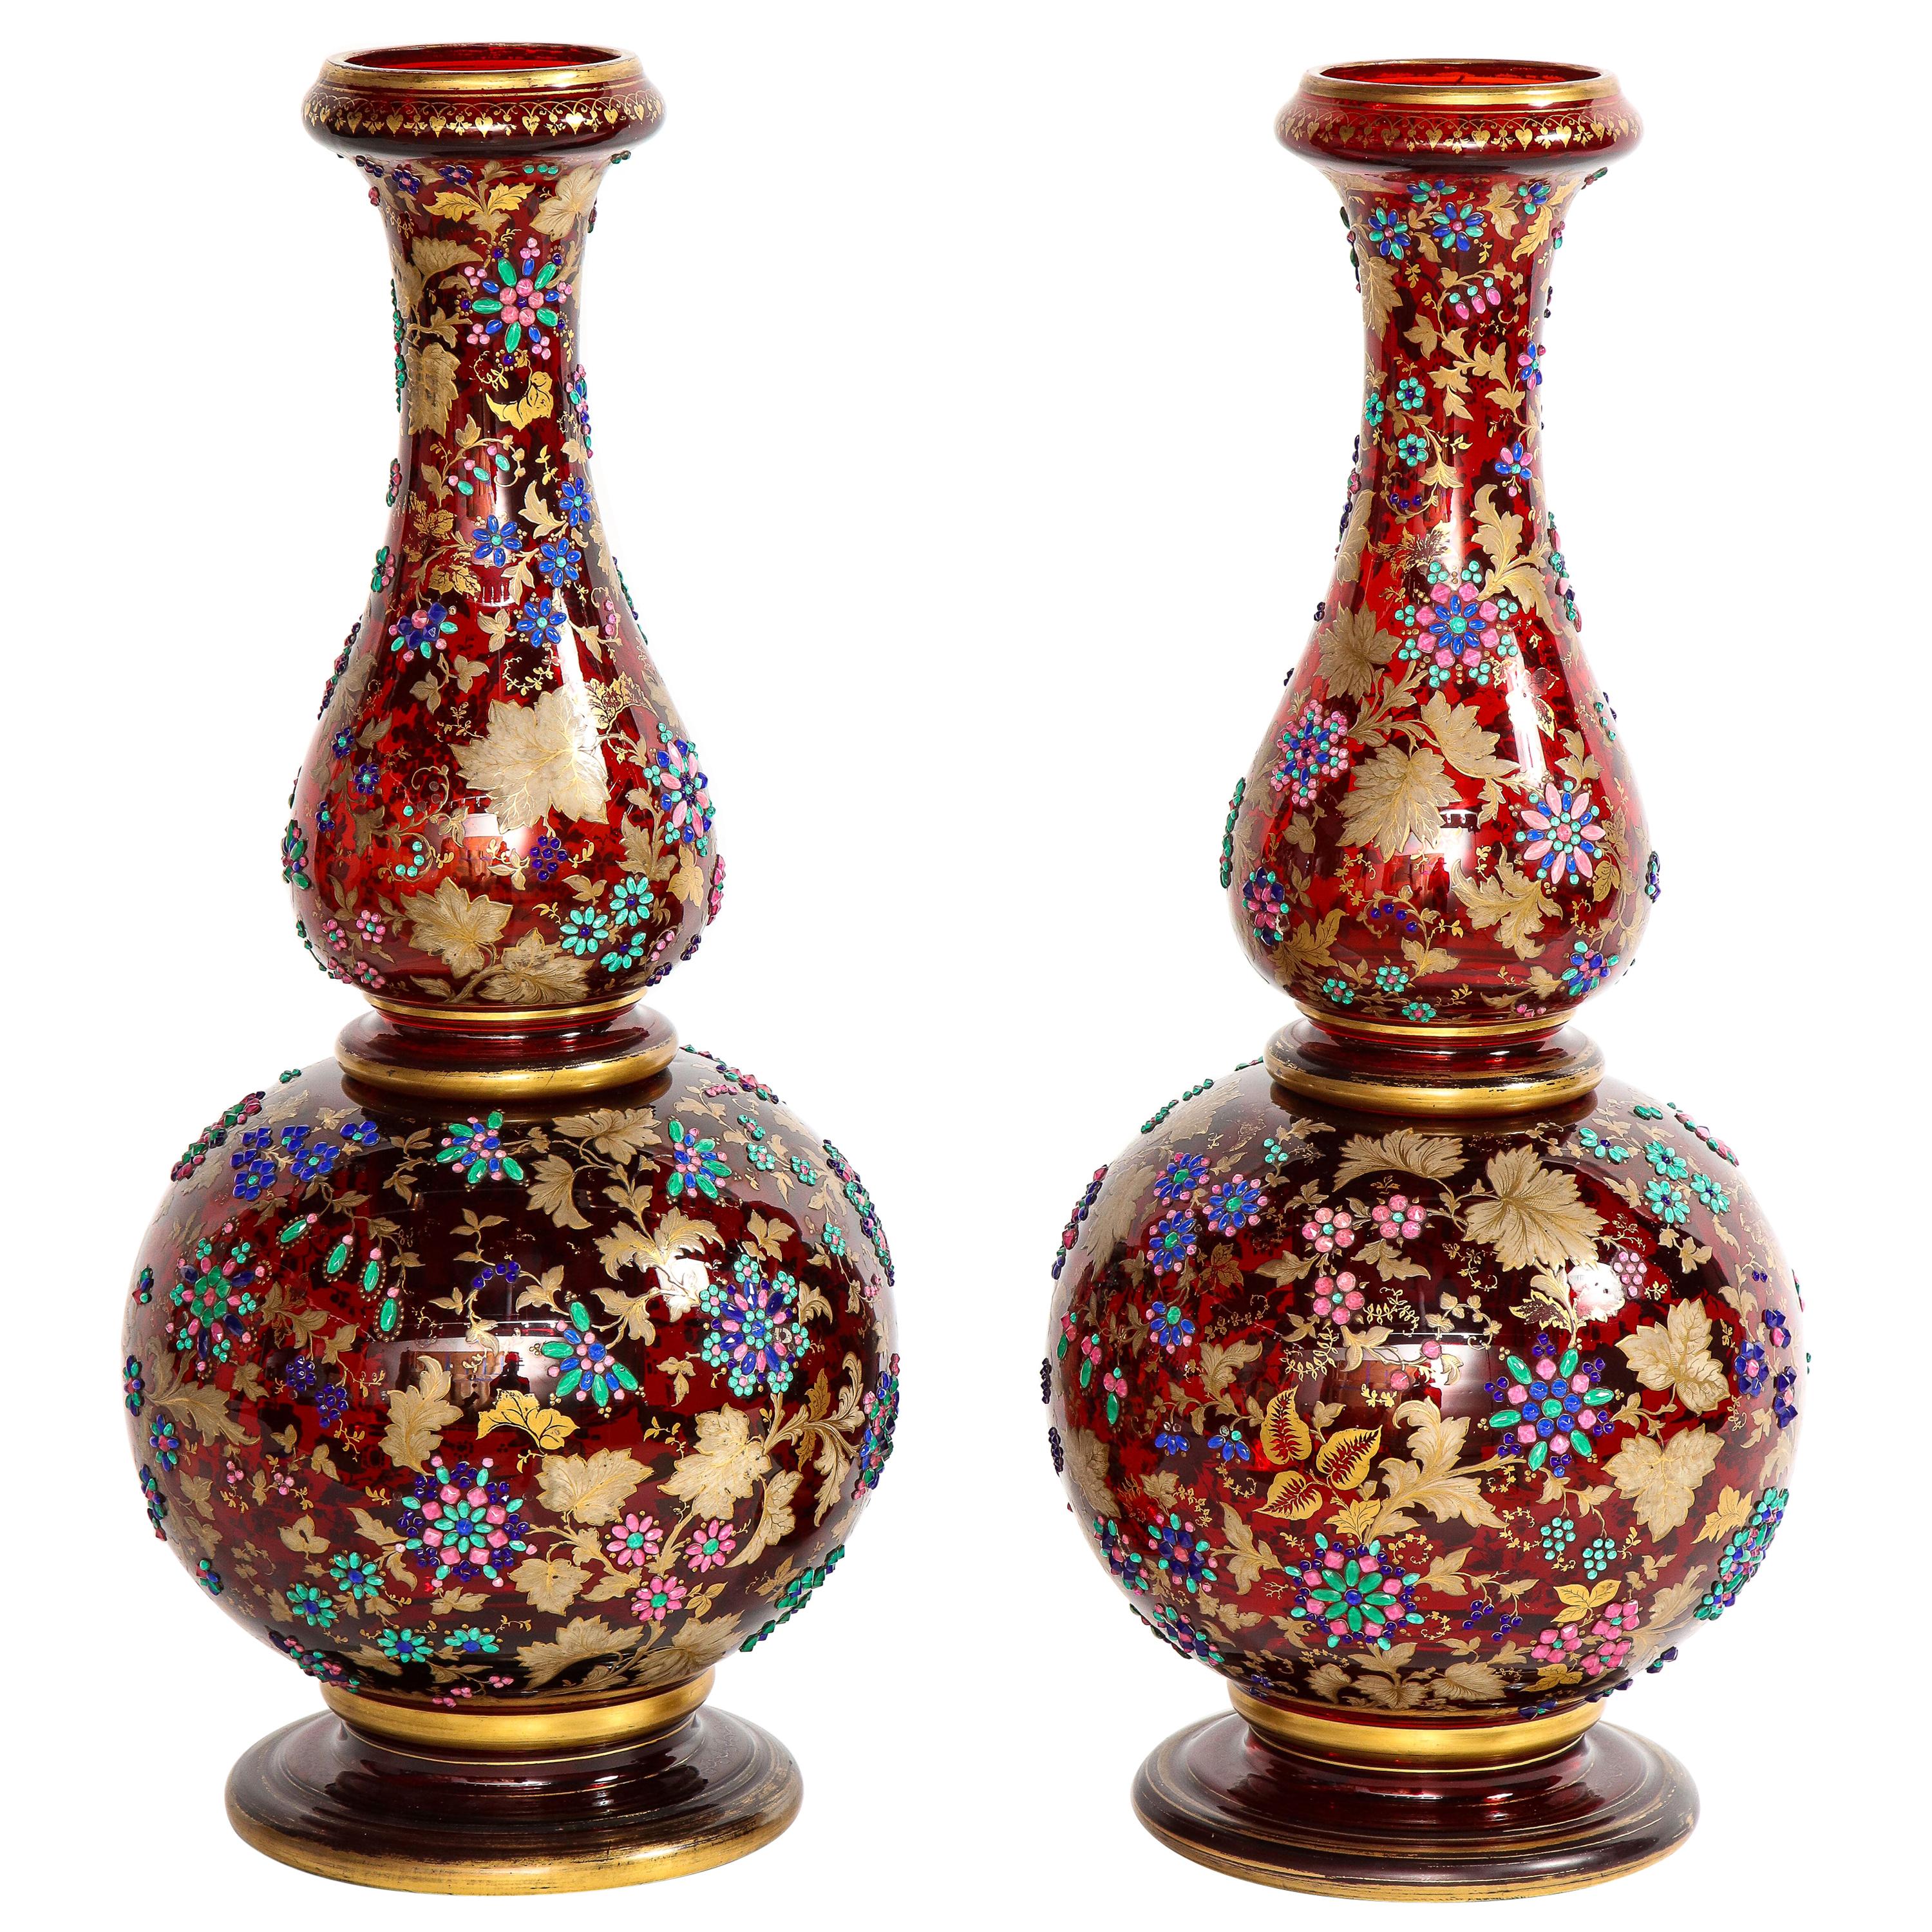 Monumental Pr Moser jeweled Ruby-Red Overlay Two-Piece 24k Gold, Enameled Vases For Sale